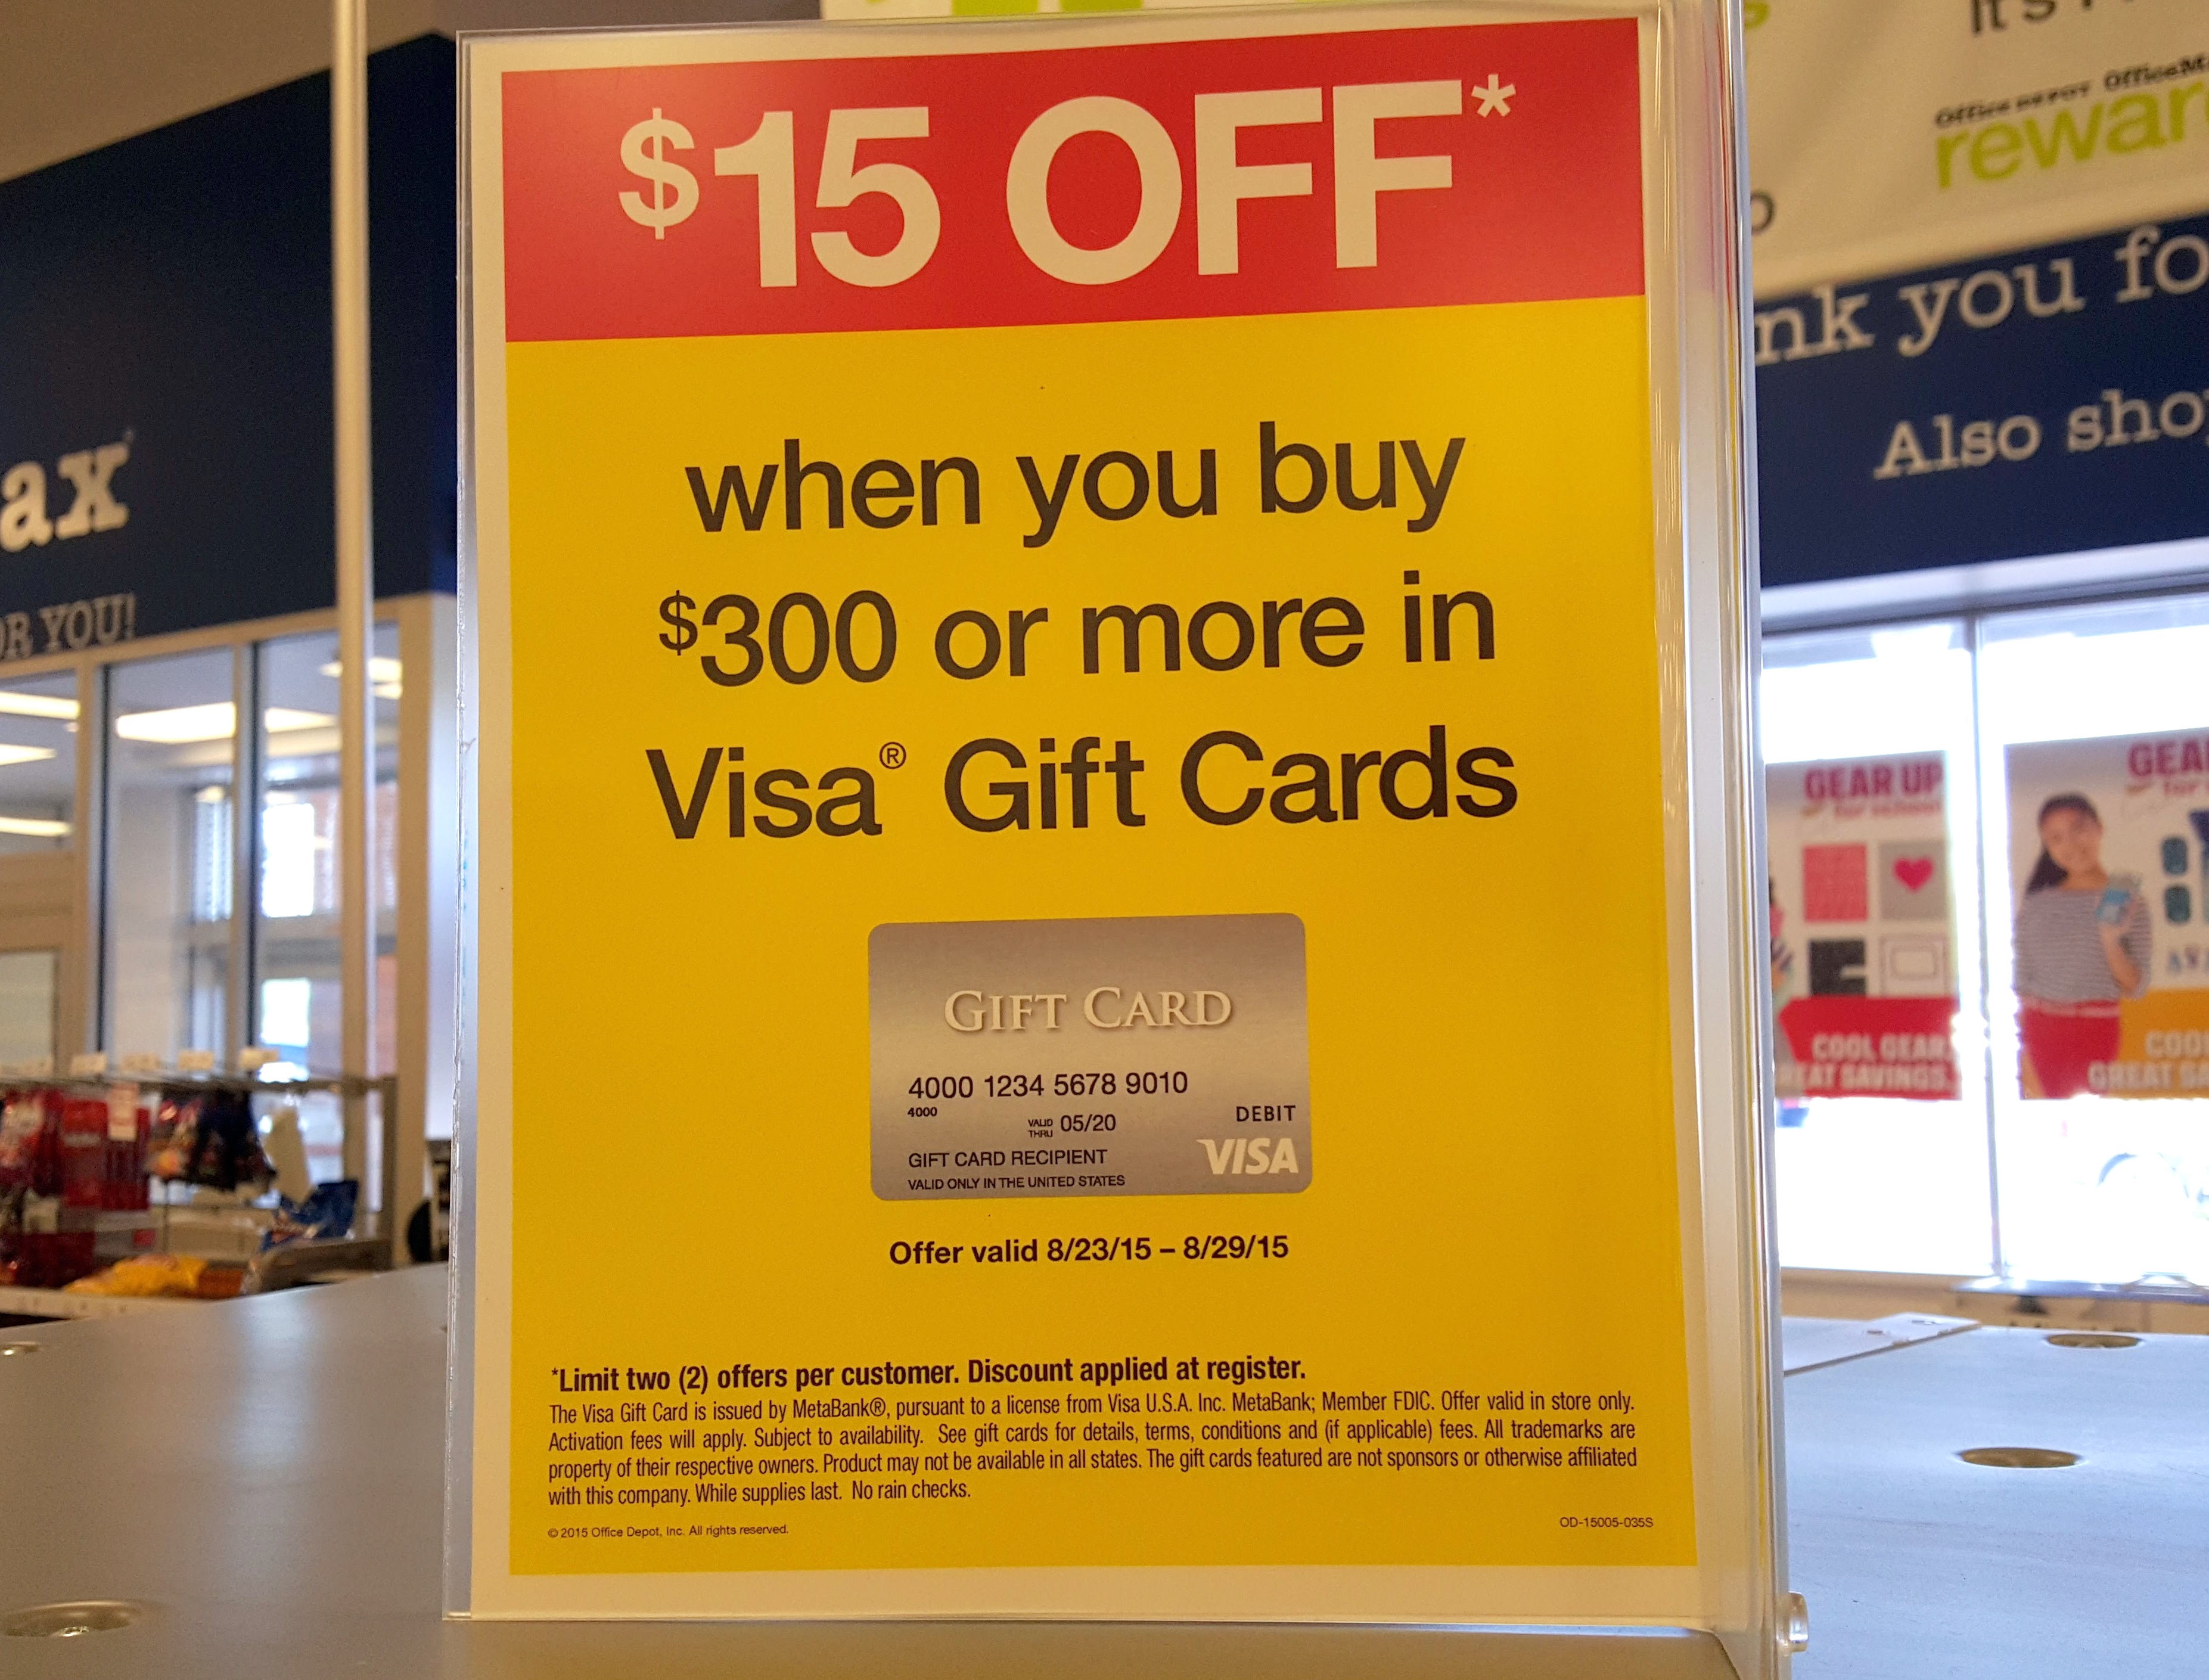 15-instant-rebate-on-300-in-visa-gift-cards-at-officemax